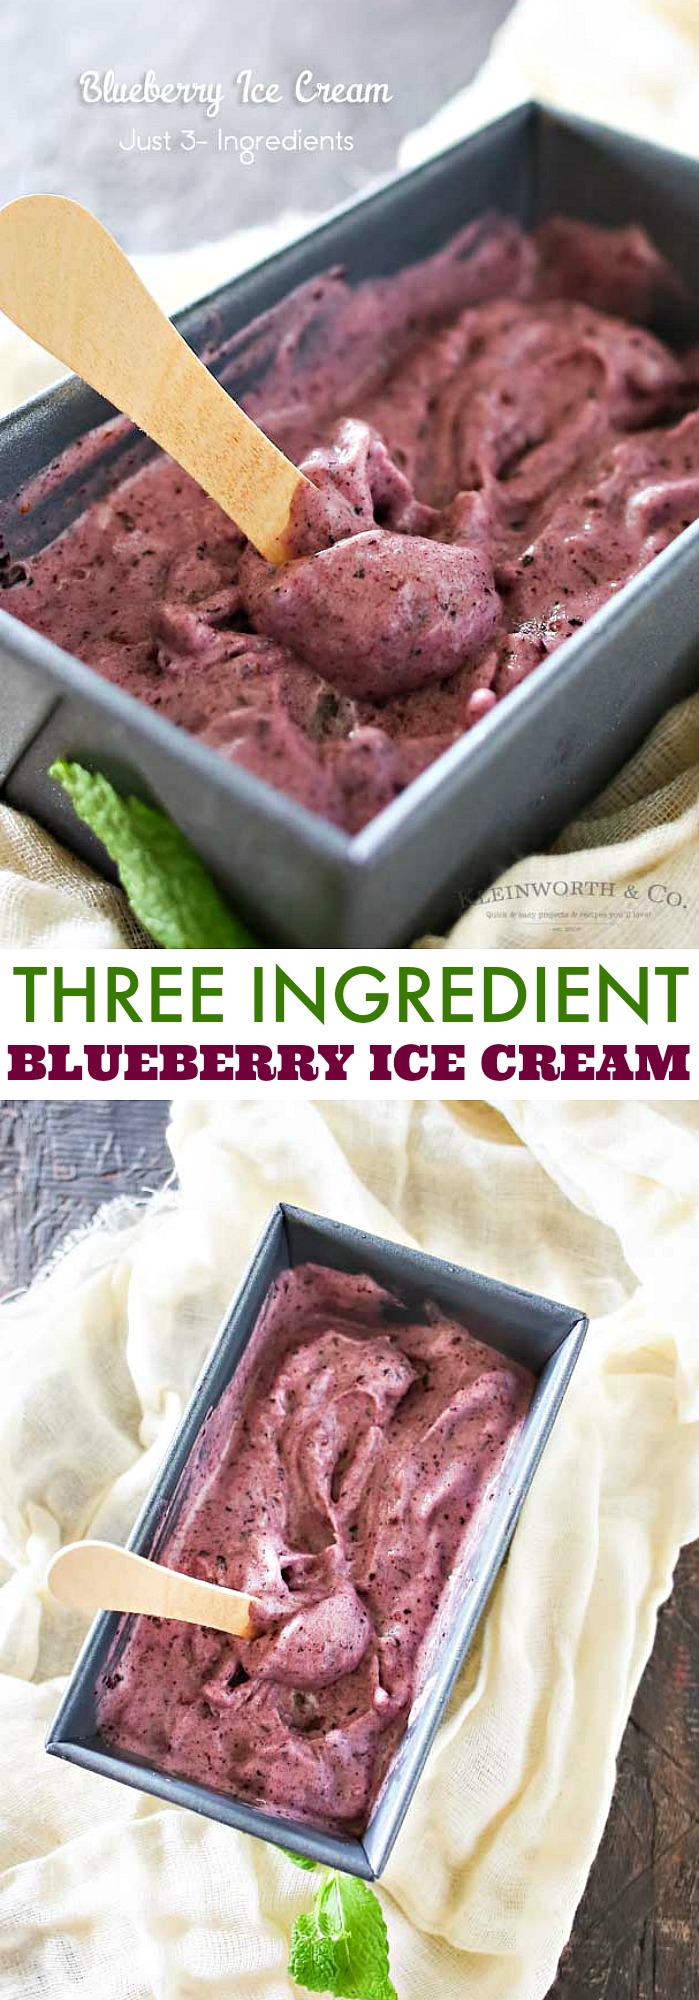 This Blueberry Ice Cream is a delicious dairy-free, 3-ingredient recipe with just fruits and honey. It takes just a couple minutes an a blender! It's a nutritious dessert that you won't feel guilty about!